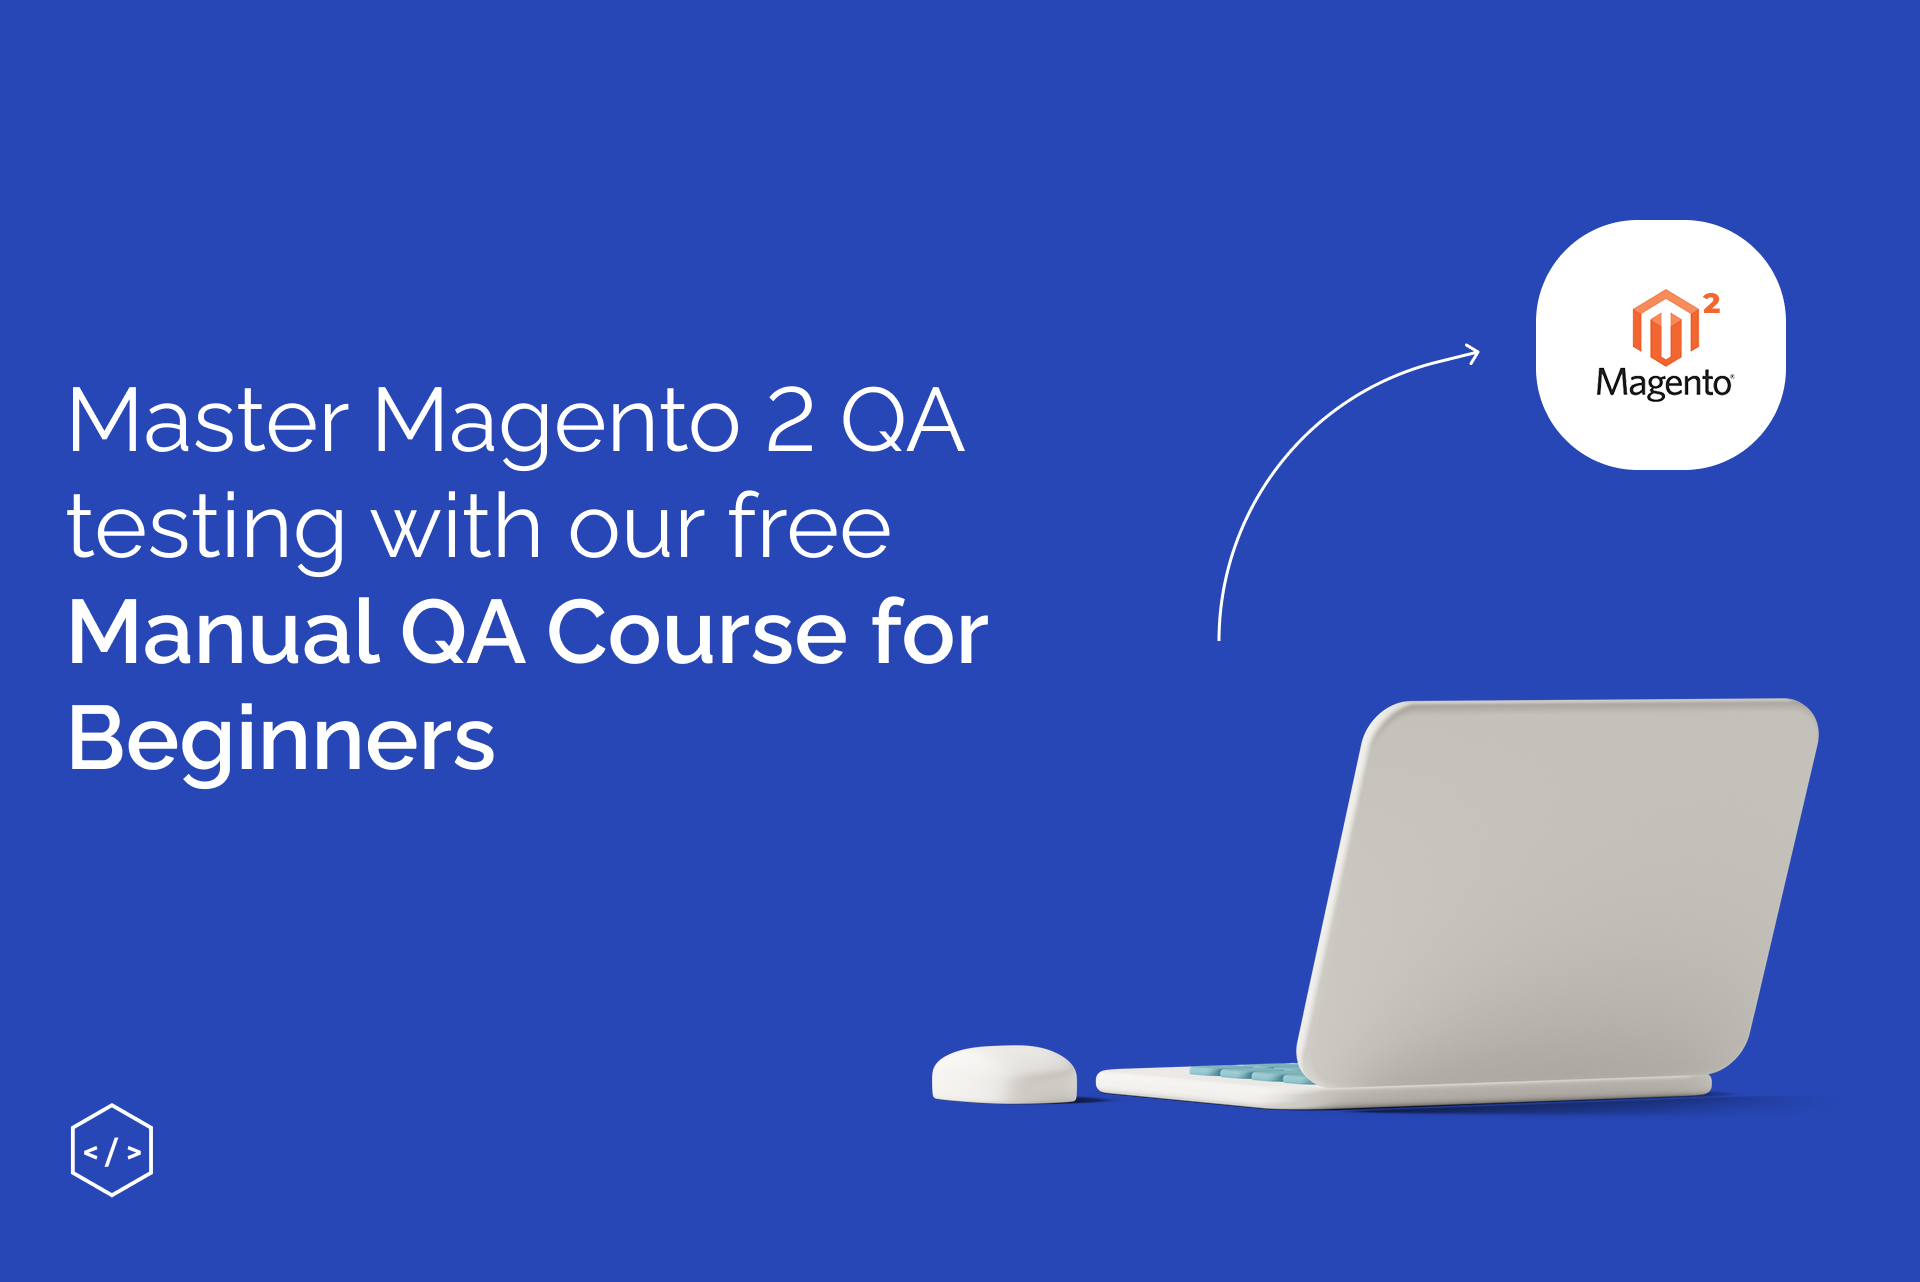 Get started as a QA engineer on Magento 2